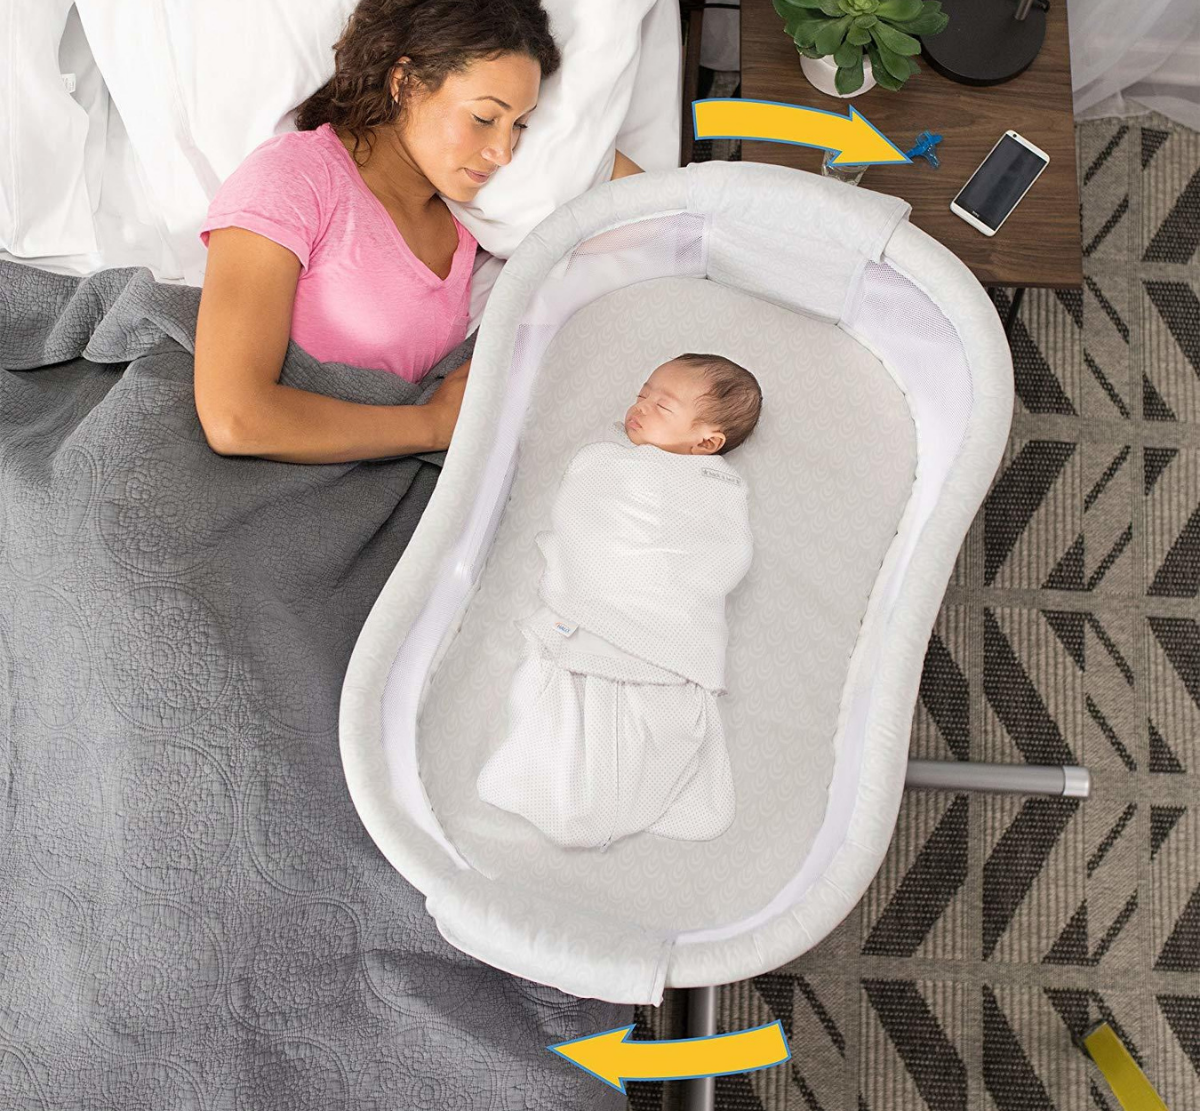 HALO Bassinest provides a safe co-sleeping experience for infants